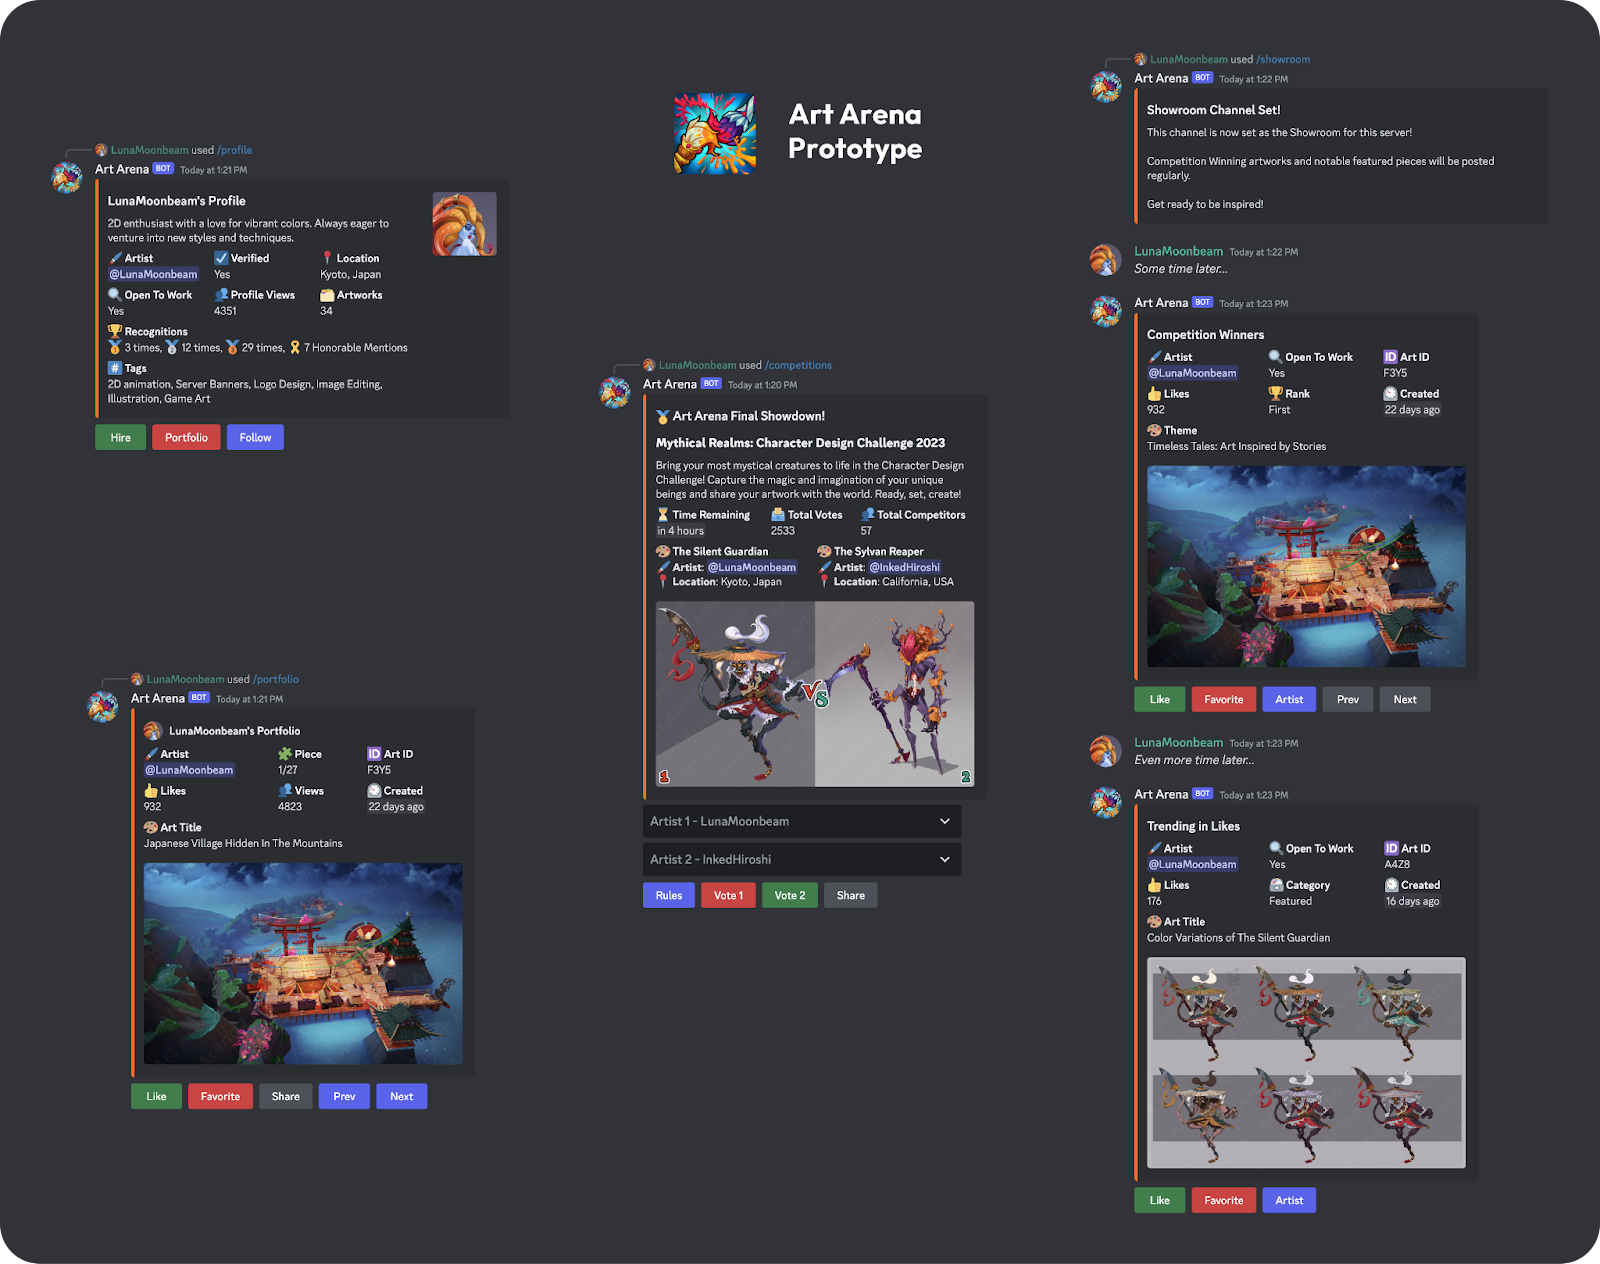 Prototype assets for Art Arena. Support for competitions, portfolios, and profiles are shown.